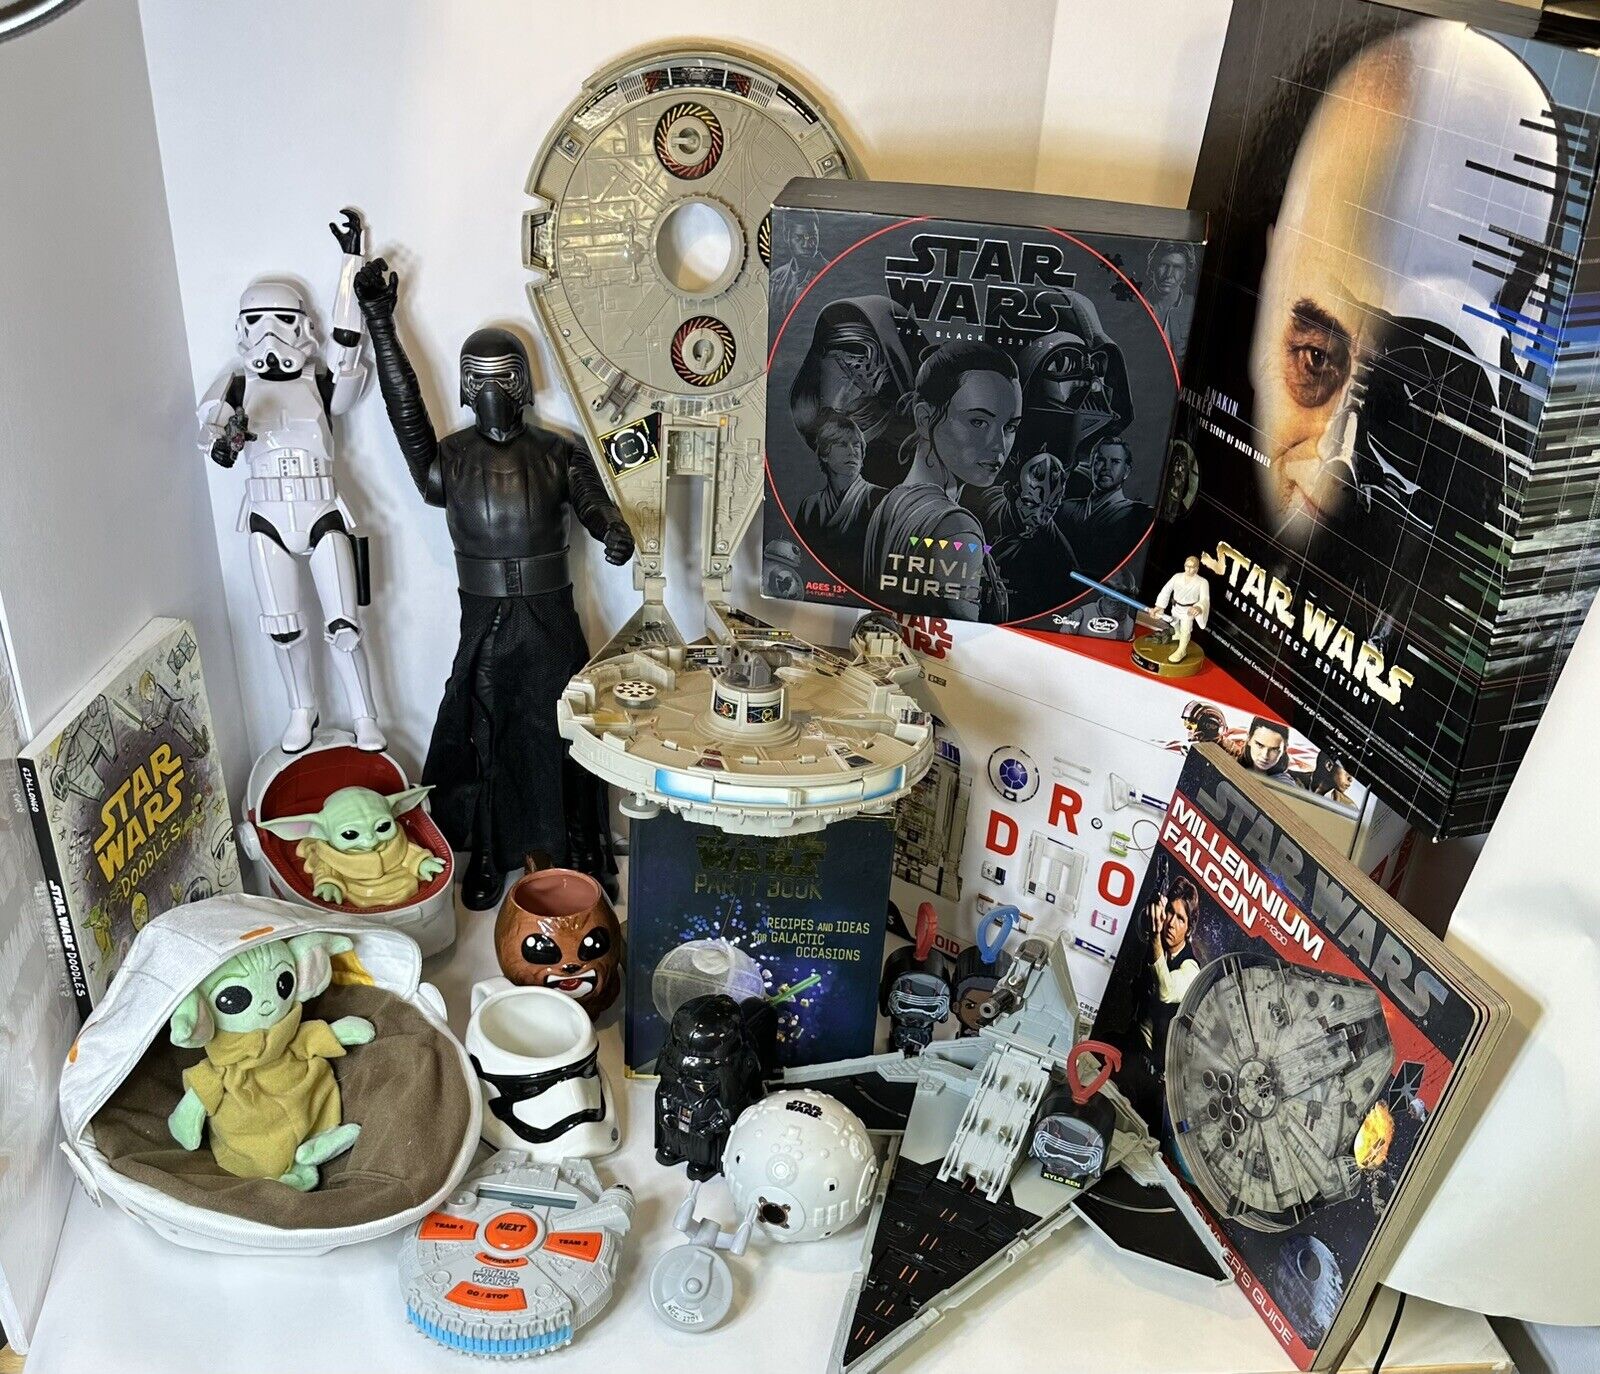 Huge Star Wars LOT Of 23 Collectors Items, Figures, Games, Books, Toys, Plush